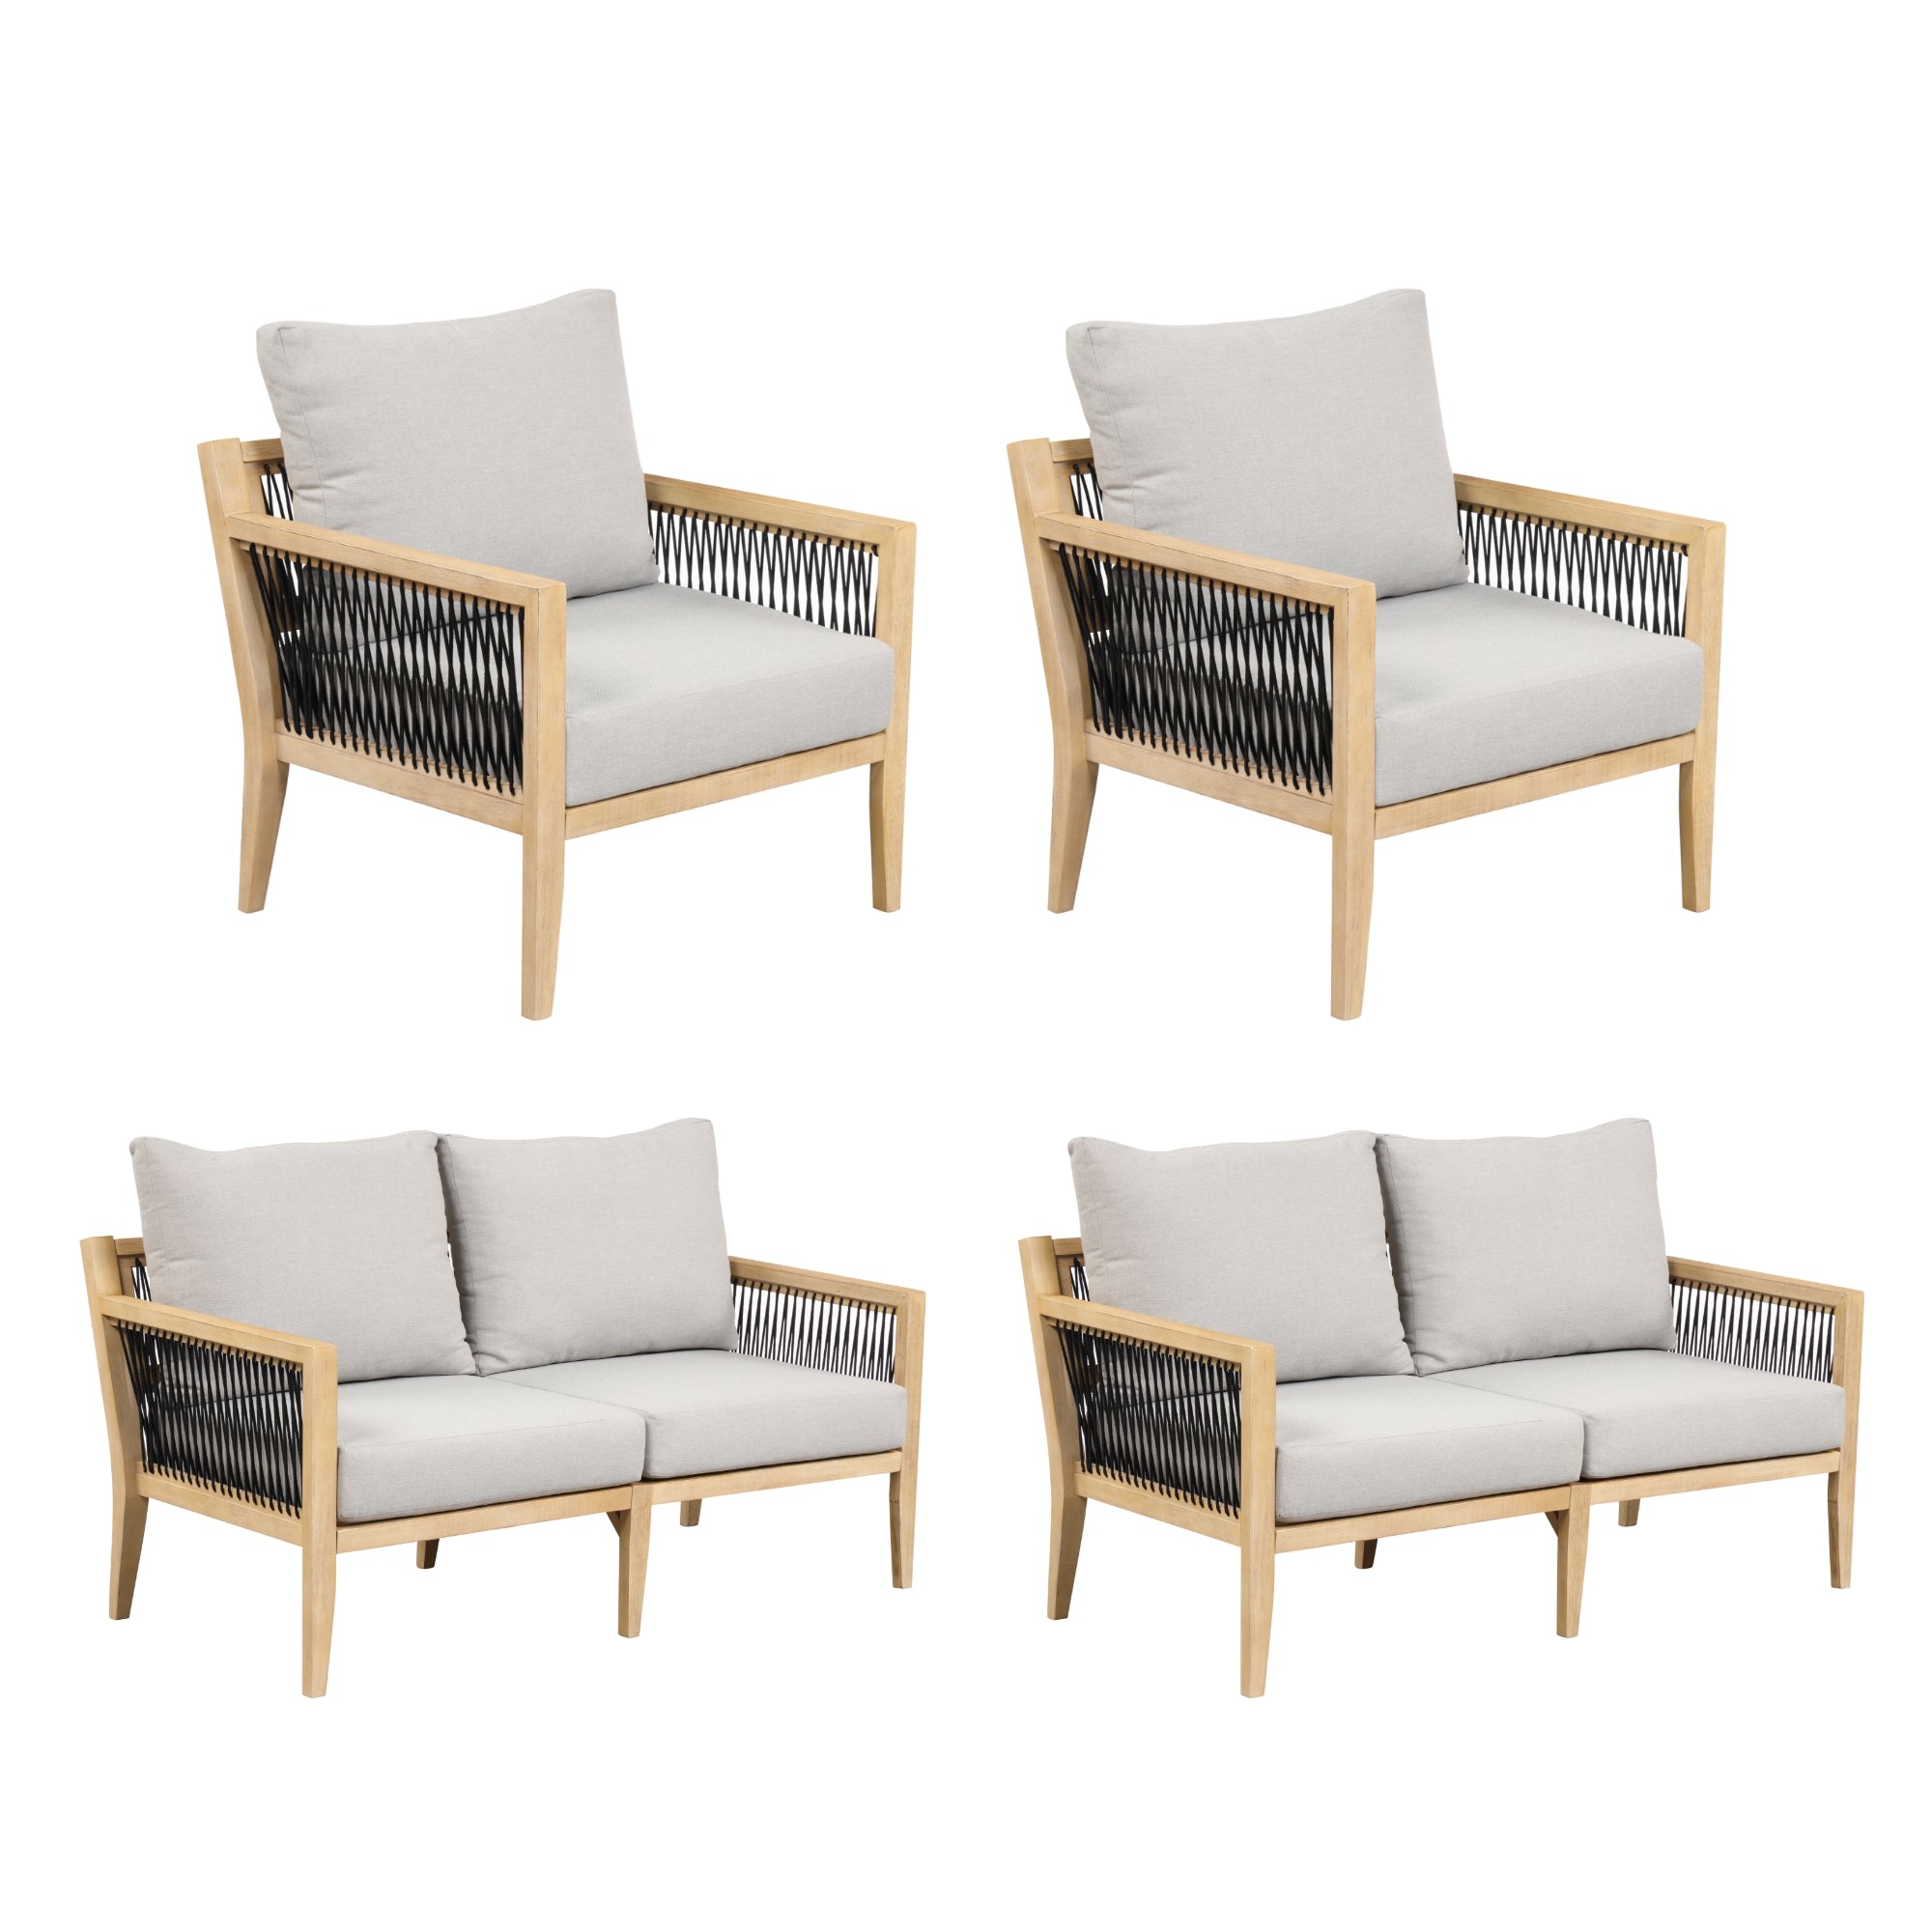 Set of 2 Outdoor Patio Couches & 2 Chairs Gray